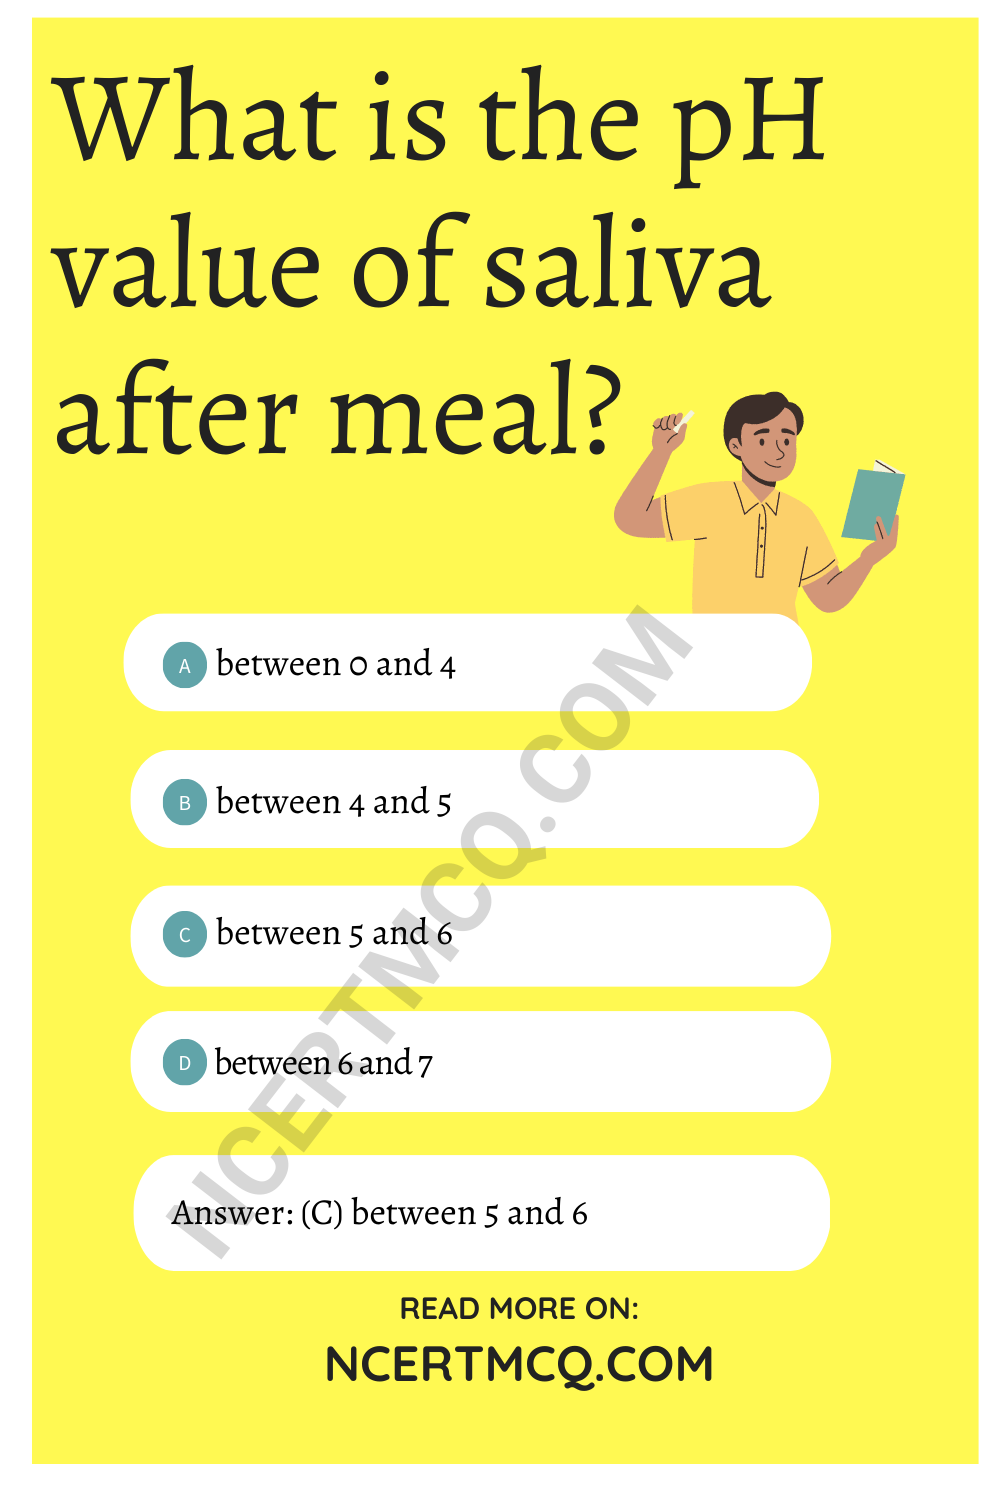 What is the pH value of saliva after meal?